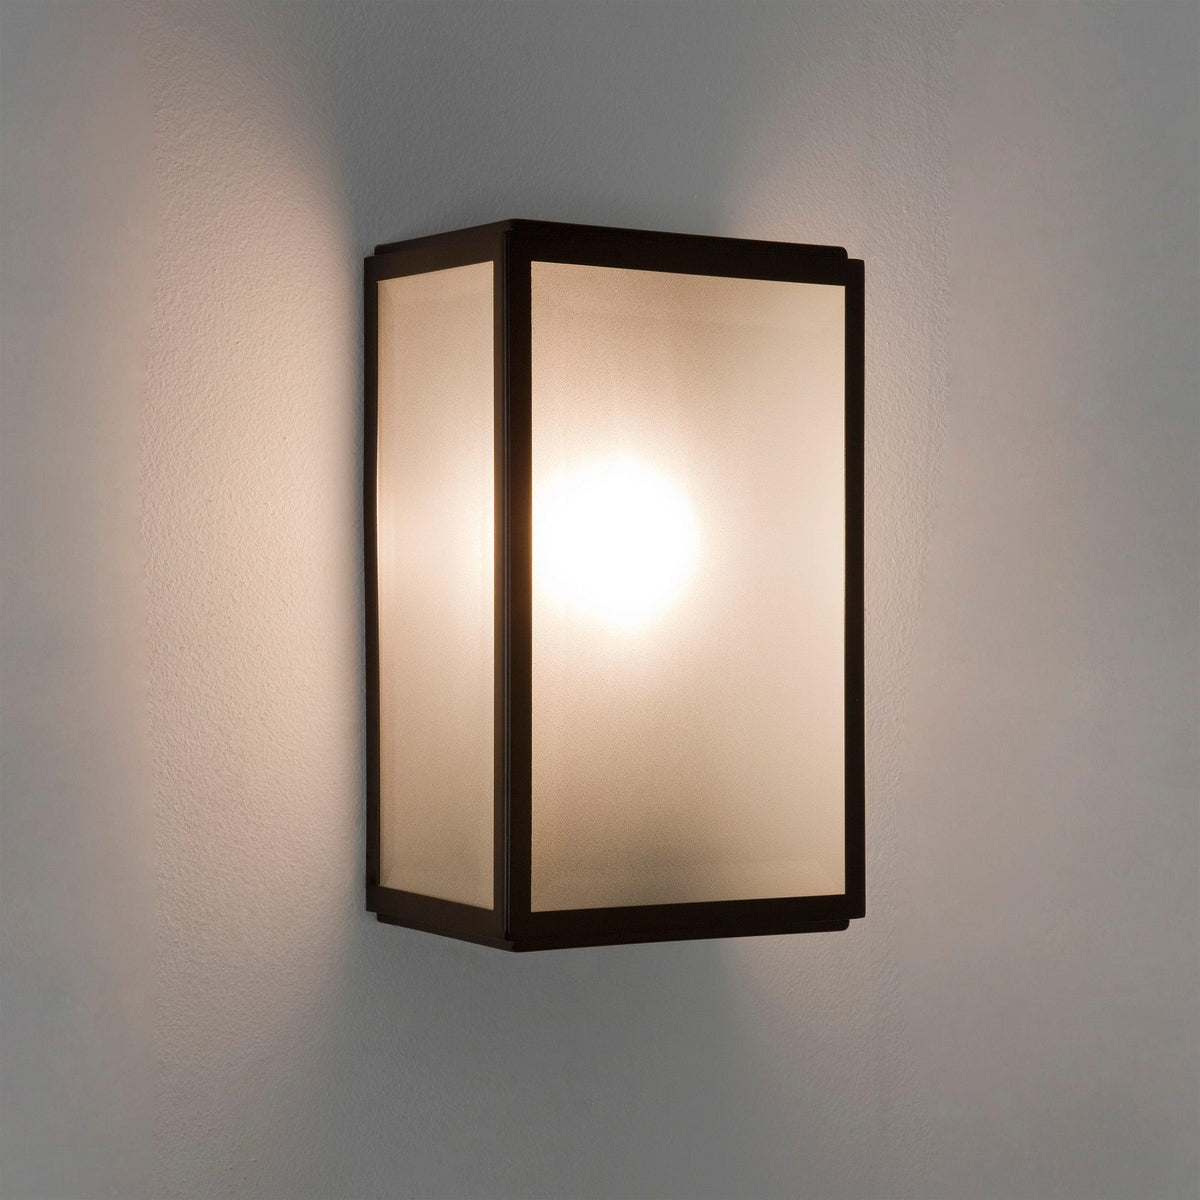 Astro Lighting - Homefield Frosted Wall Light - 1095025 | Montreal Lighting & Hardware